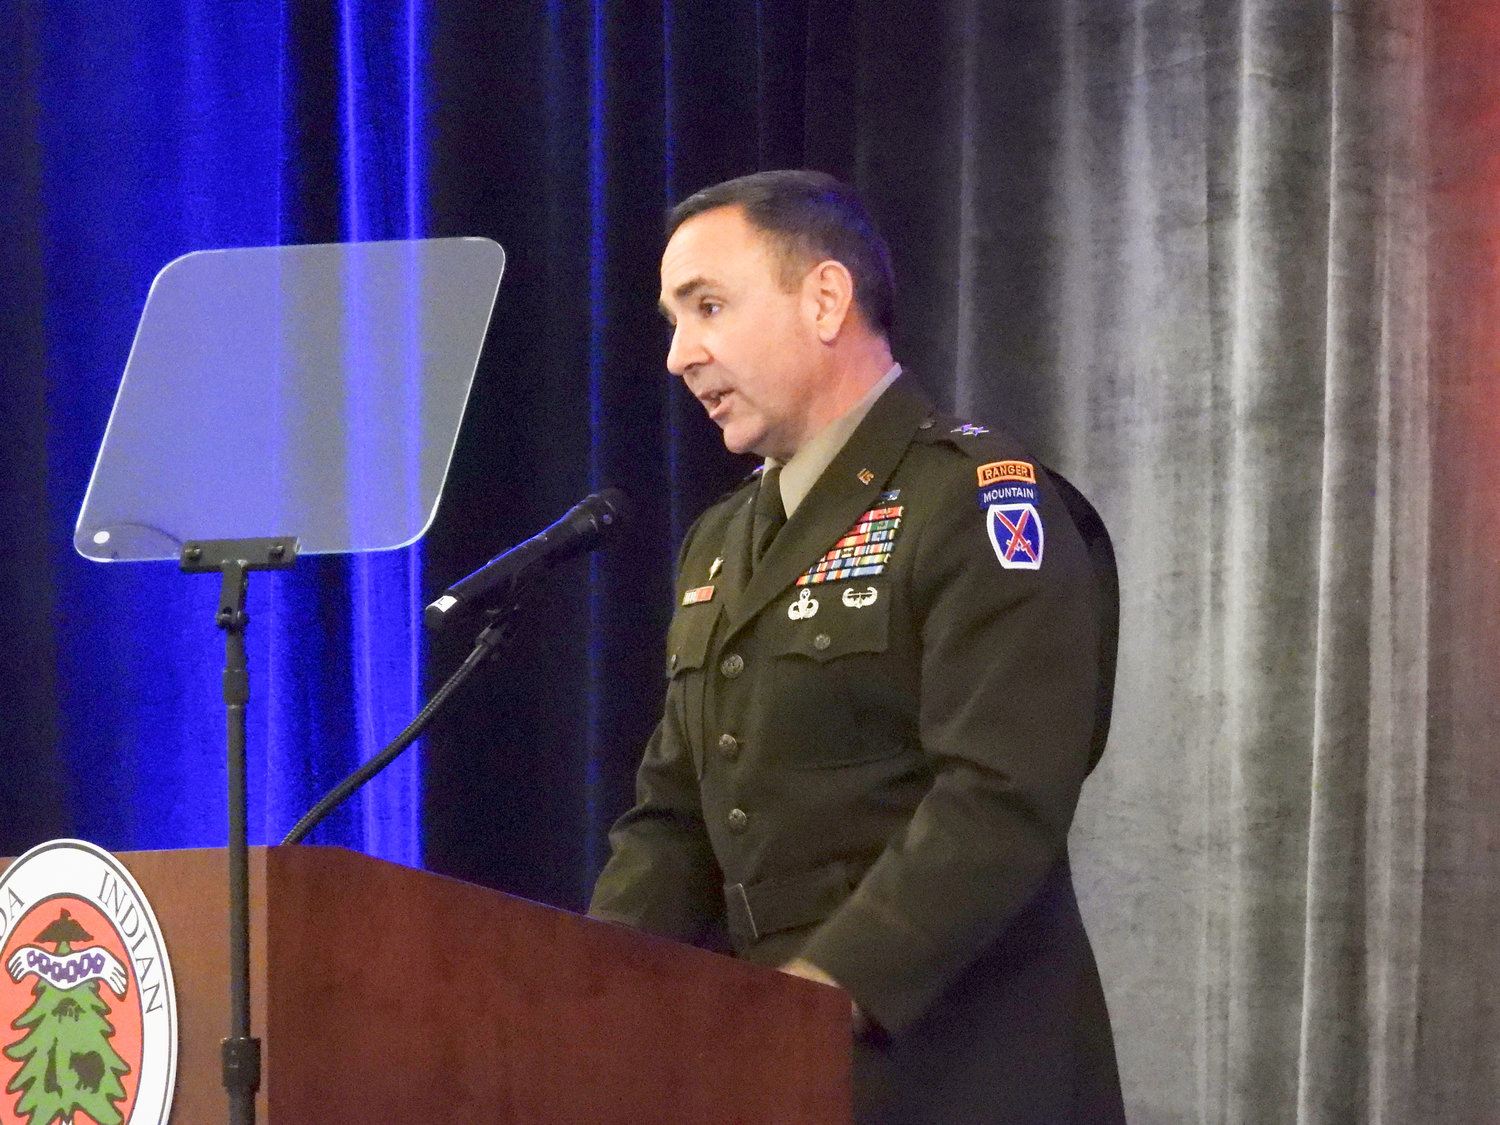 Major General Gregory Anderson speaks at the 21st annual Veterans Recognition Ceremony and Breakfast hosted by the Oneida Indian Nation on Tuesday, Nov. 1